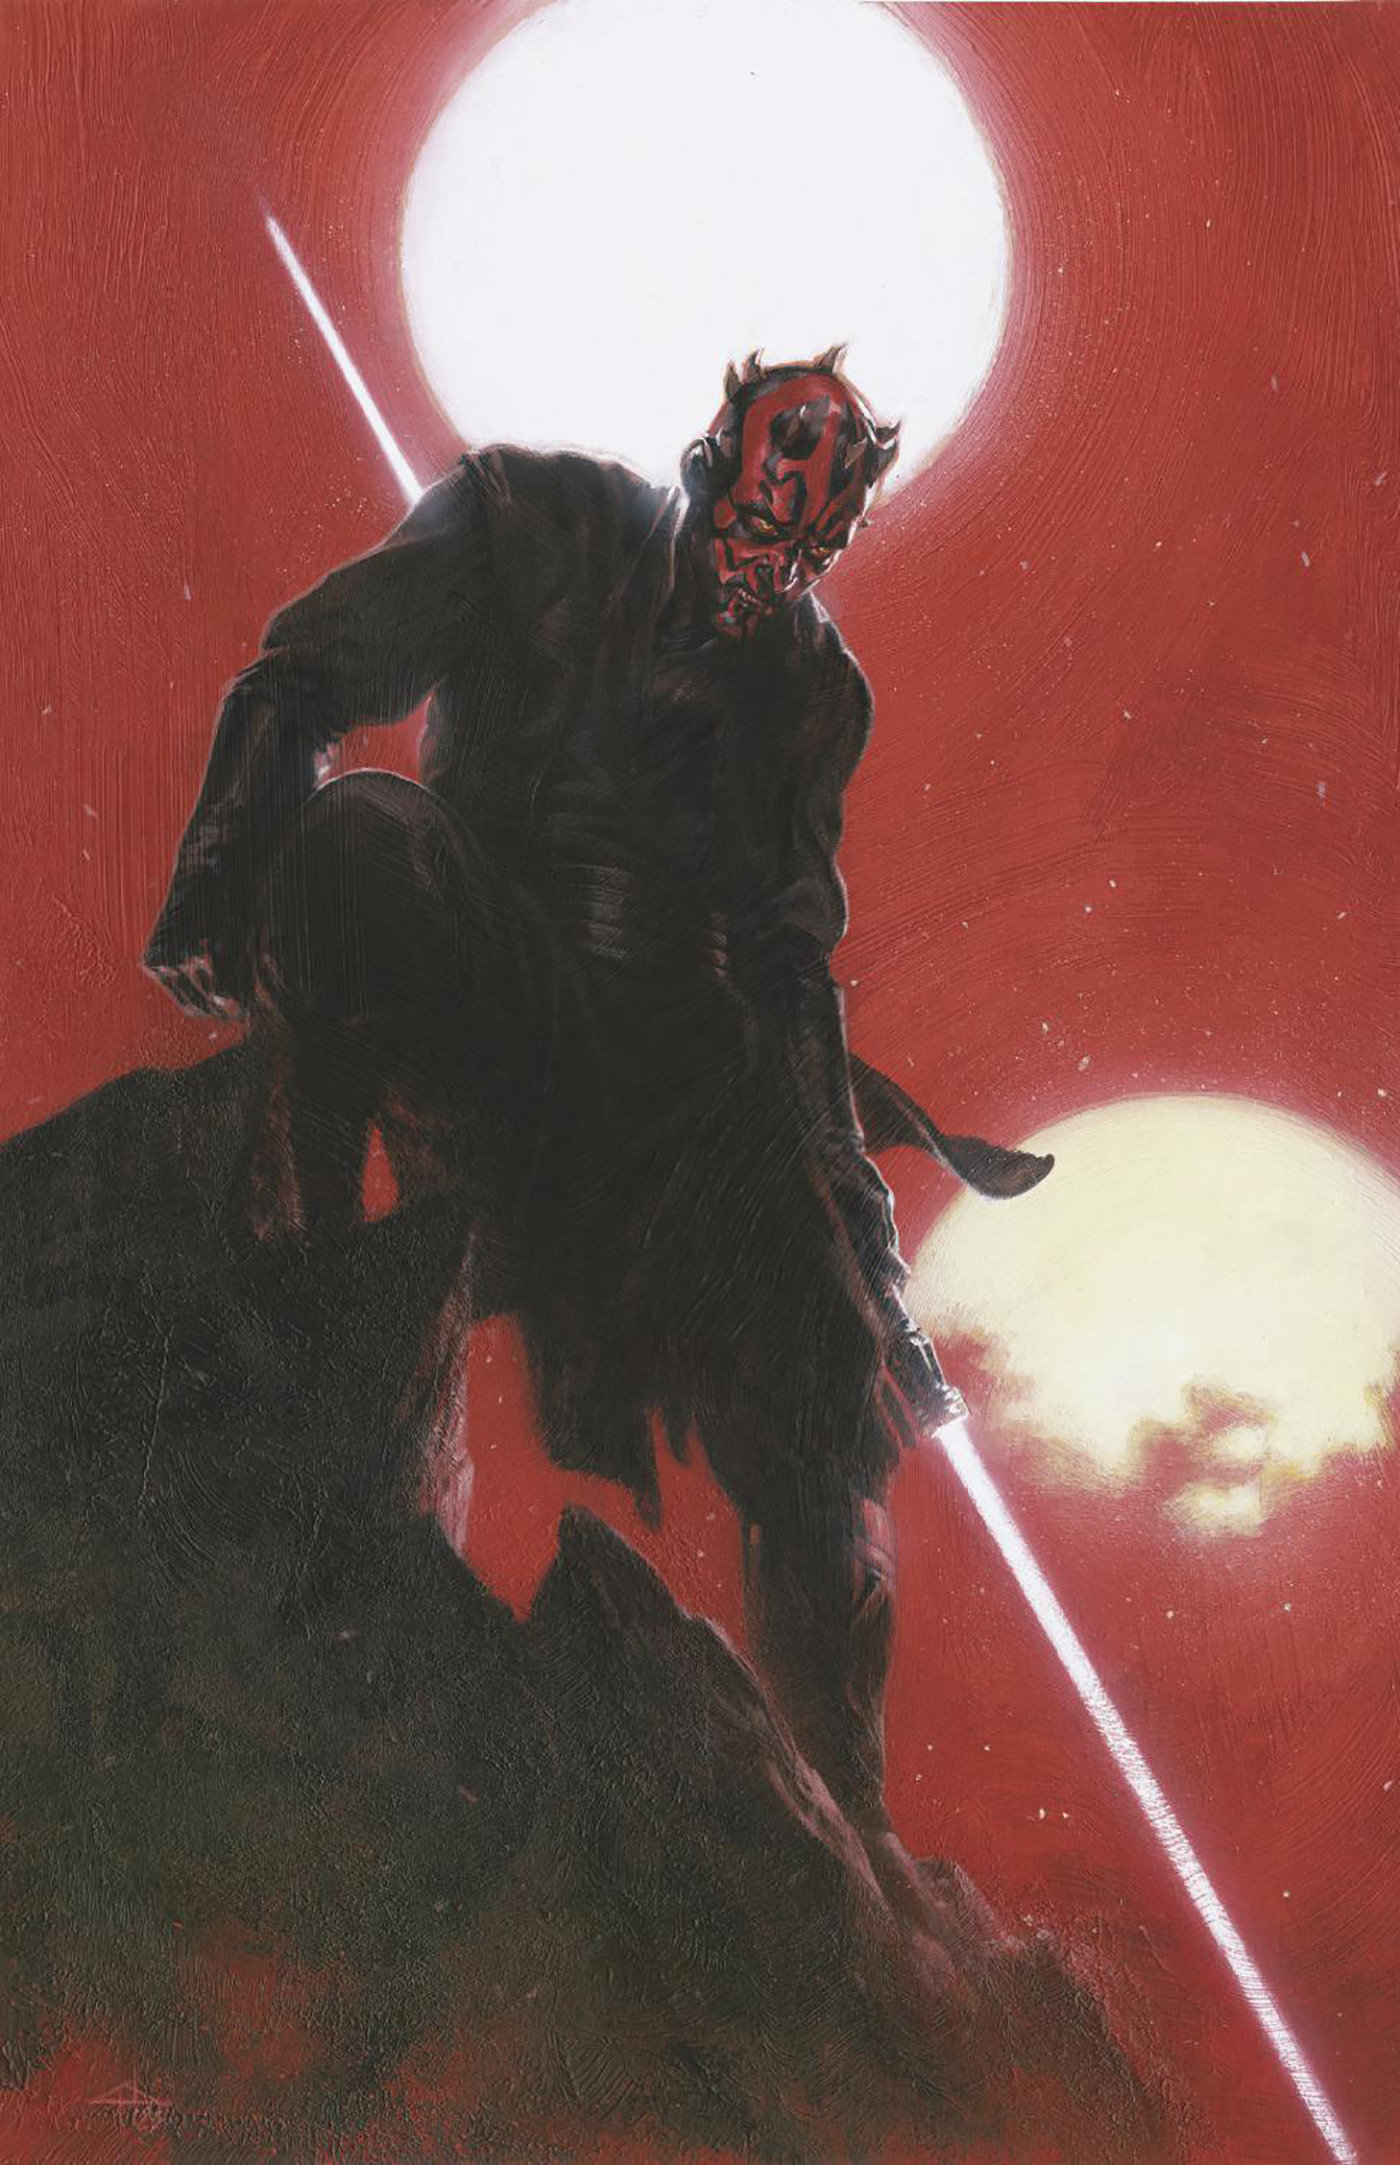 Star Wars: Darth Maul - Black, White & Red #2 1 for 100 Incentive Virgin Variant